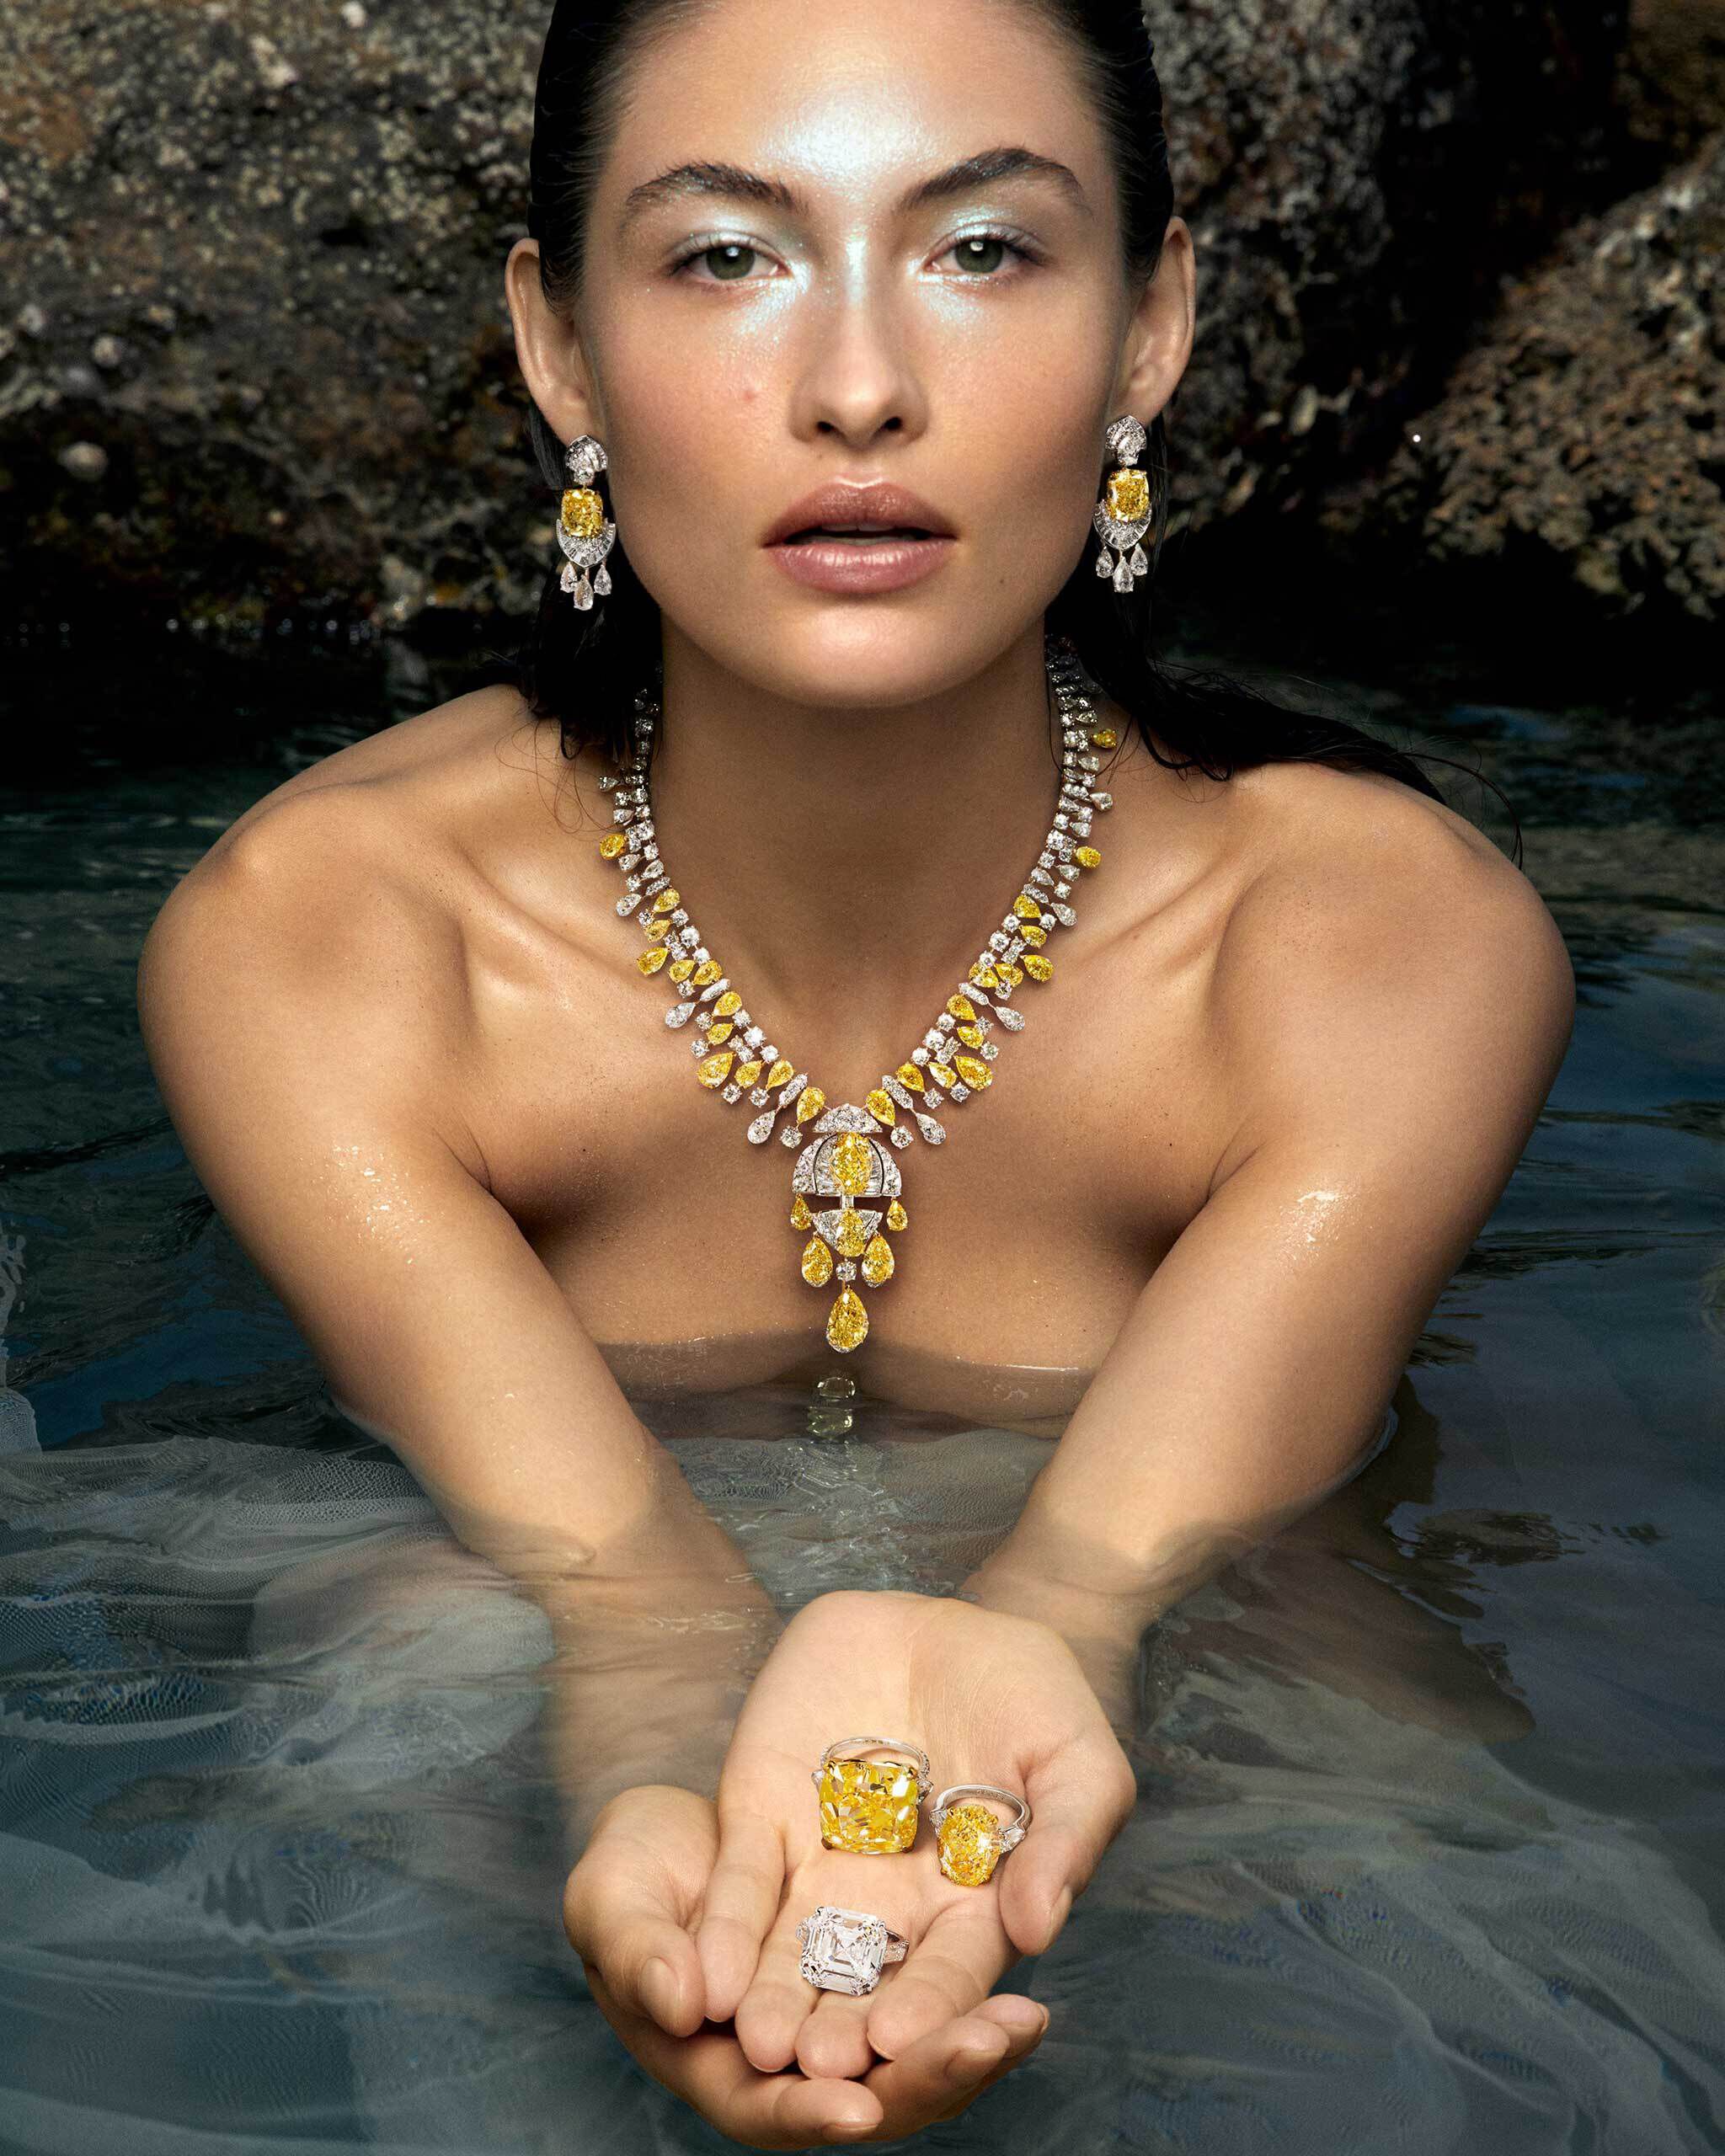 Model wearing Graff yellow and white diamond necklace and earrings and holding three Graff yellow and white diamond rings in her hands